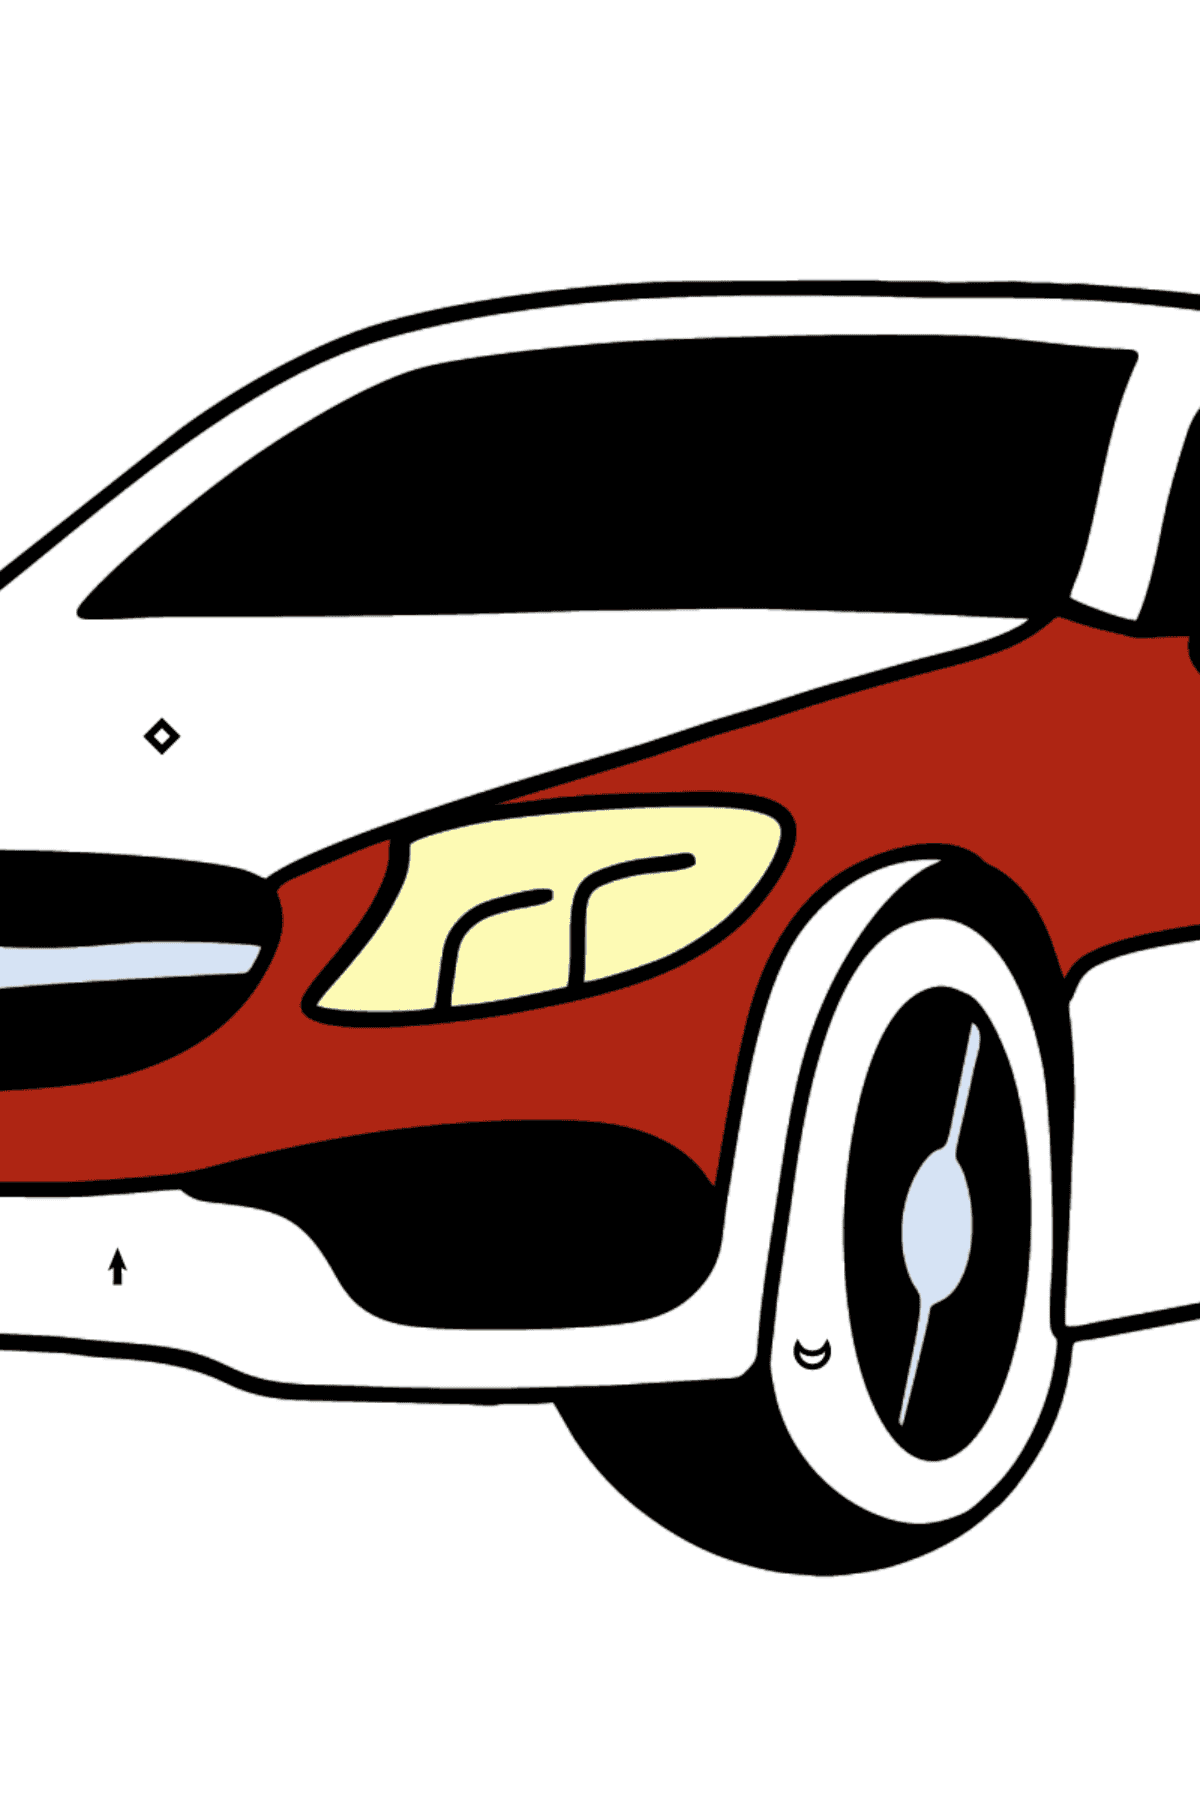 Mercedes C63 AMG car coloring page - Coloring by Symbols for Kids